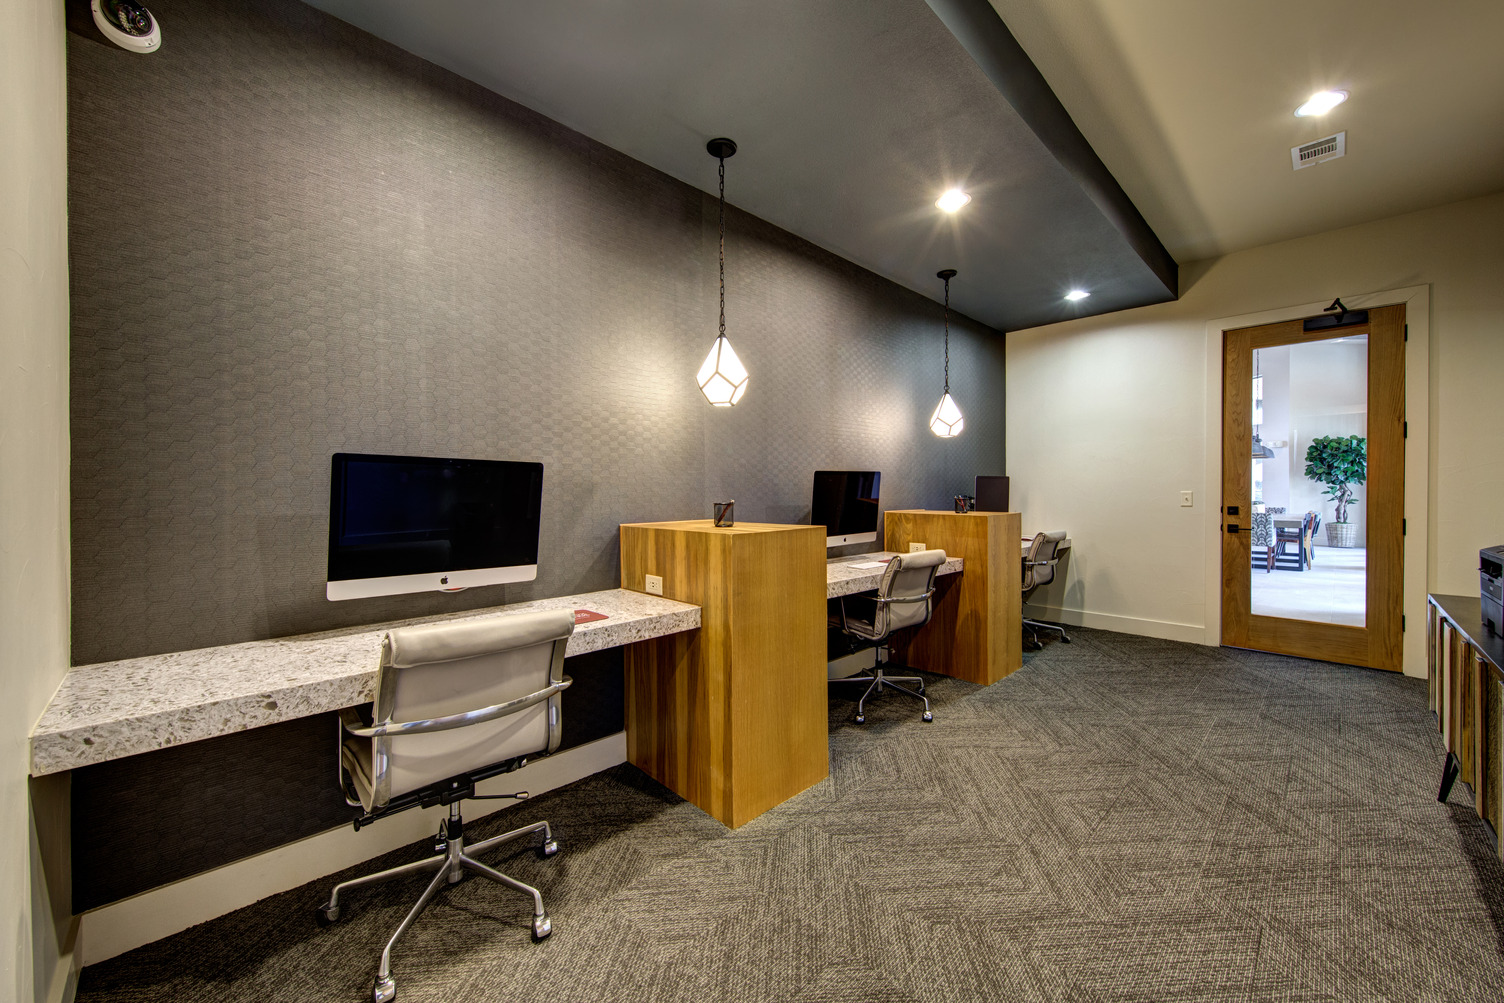 Business center with swivel chairs, three workstations with iMac, and door leading to courtyard